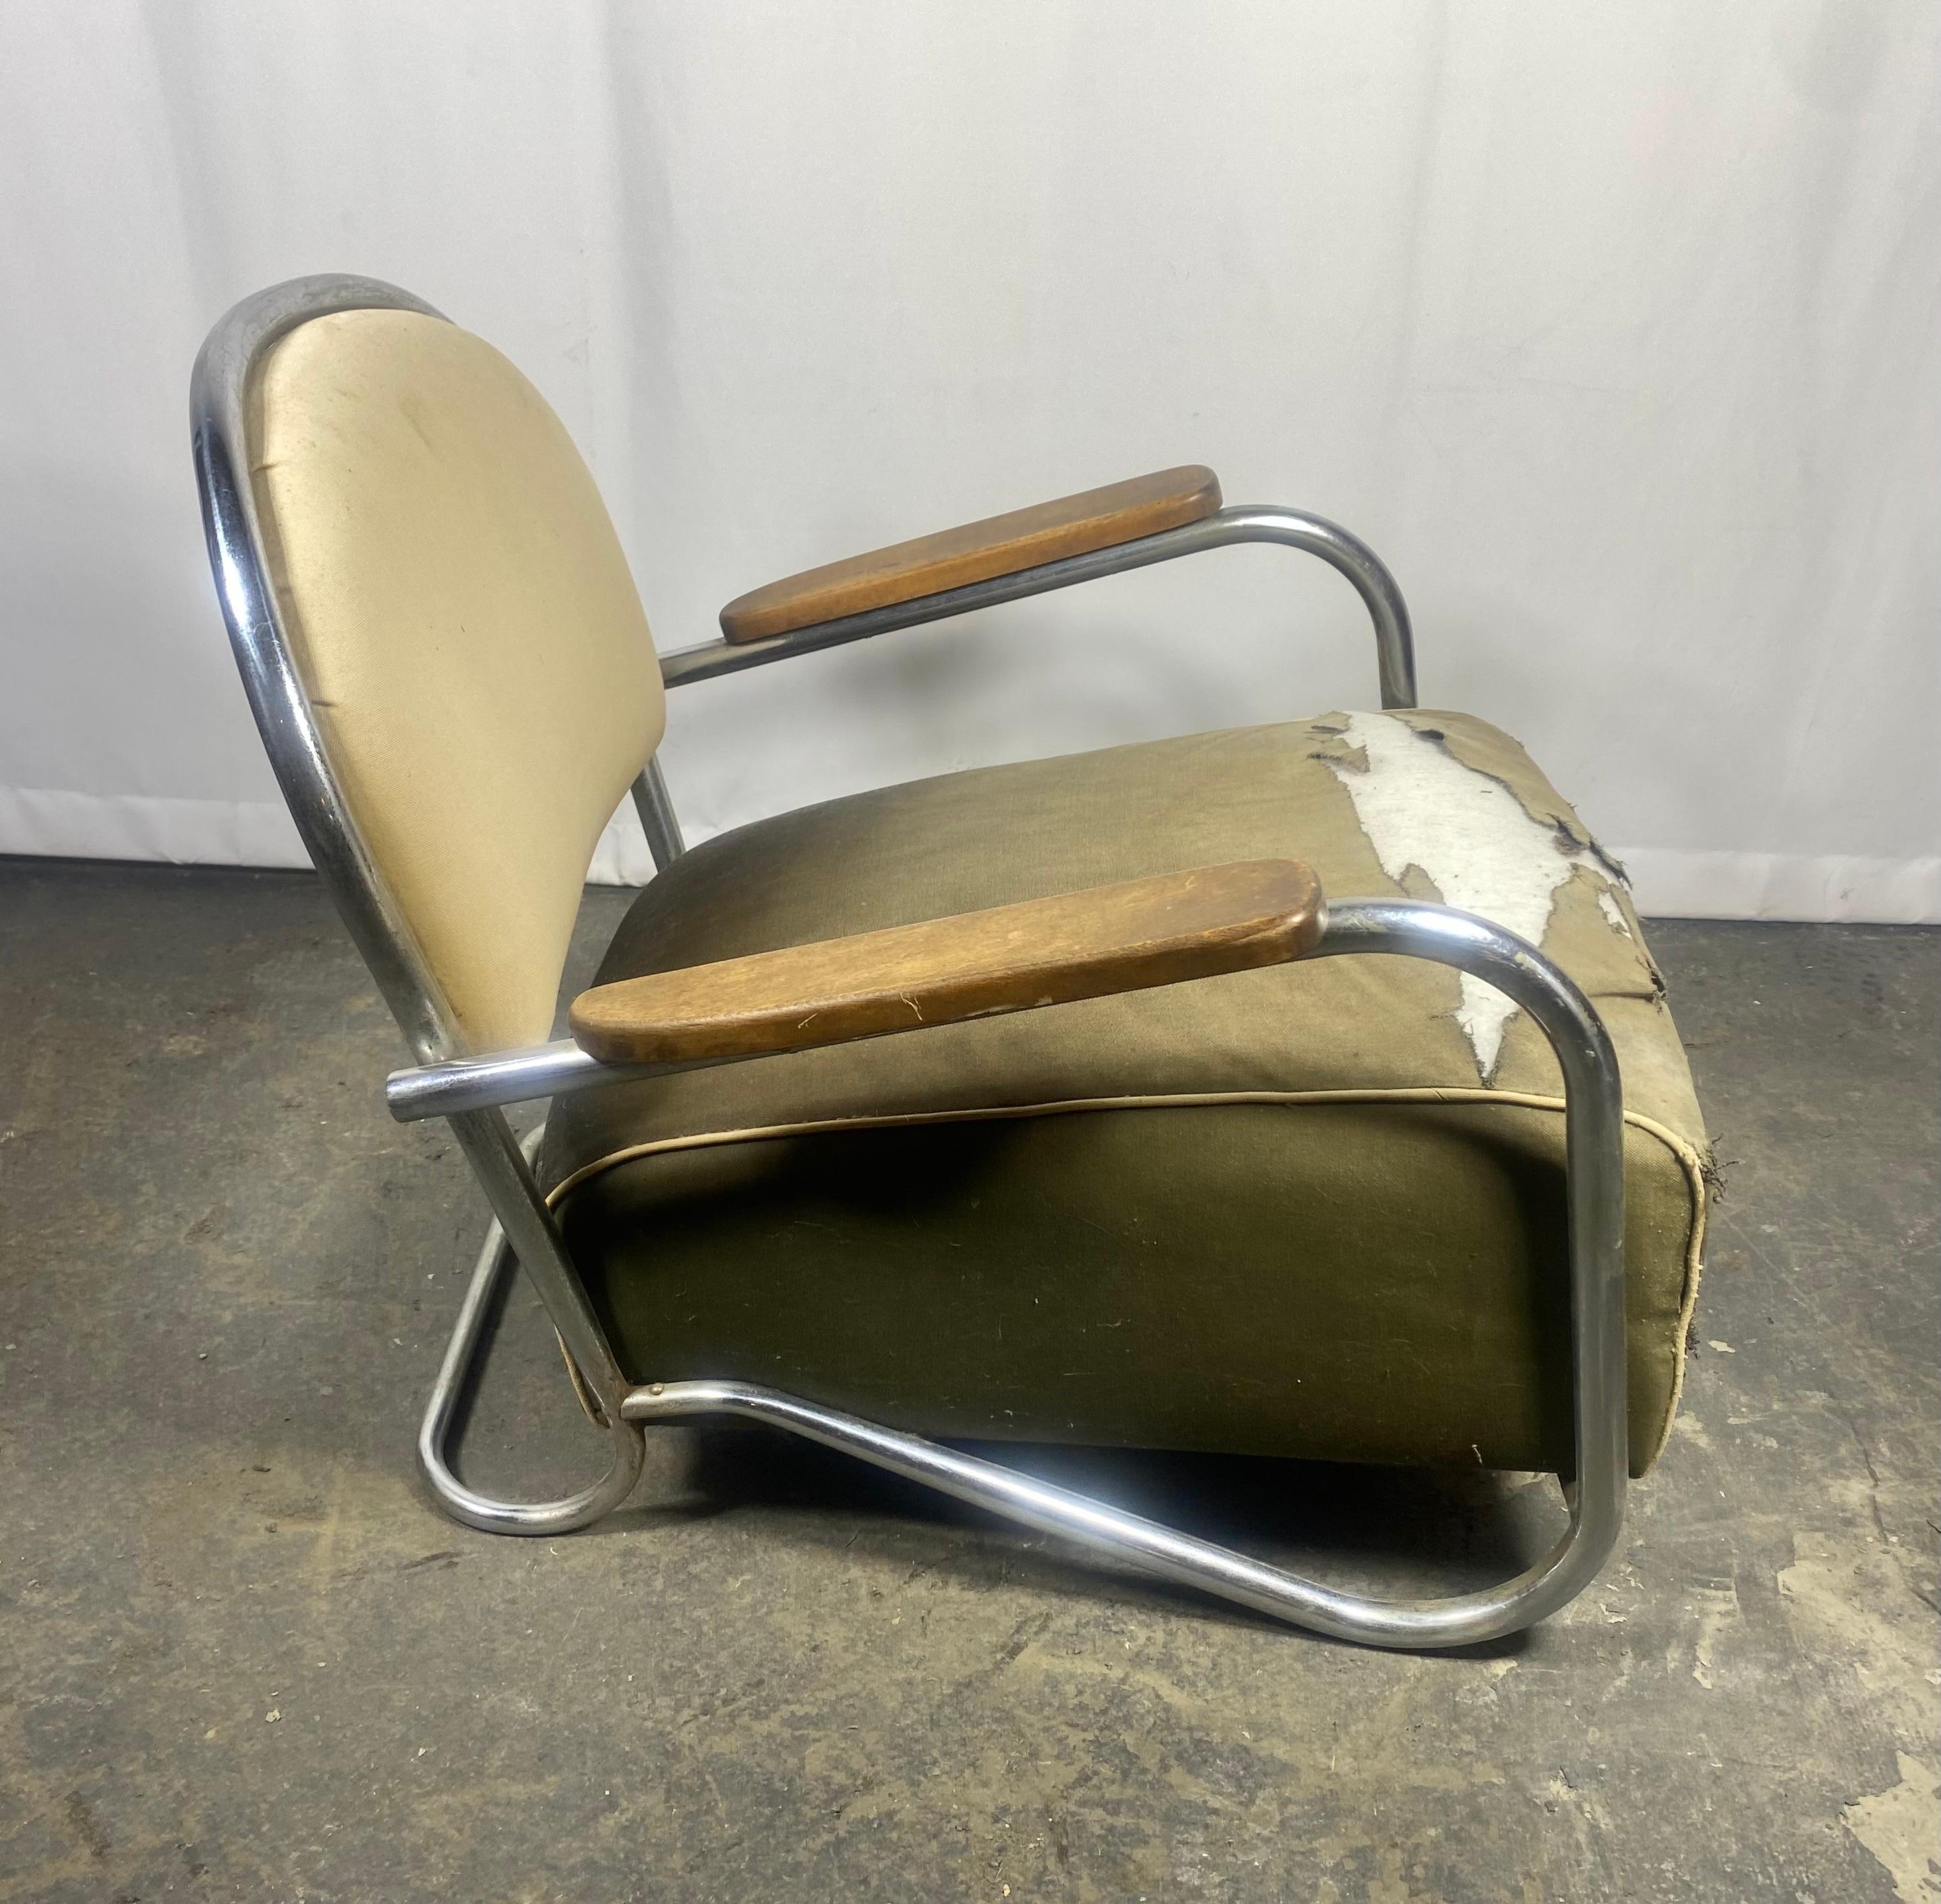 Streamline Moderne iconic design by Karl Emanuel Martin (K.E.M.) Weber designed in 1934 and manufactured '35-37 by Lloyd Manufacturing. Uncommon and most sought after form of seating suite .Selling i 